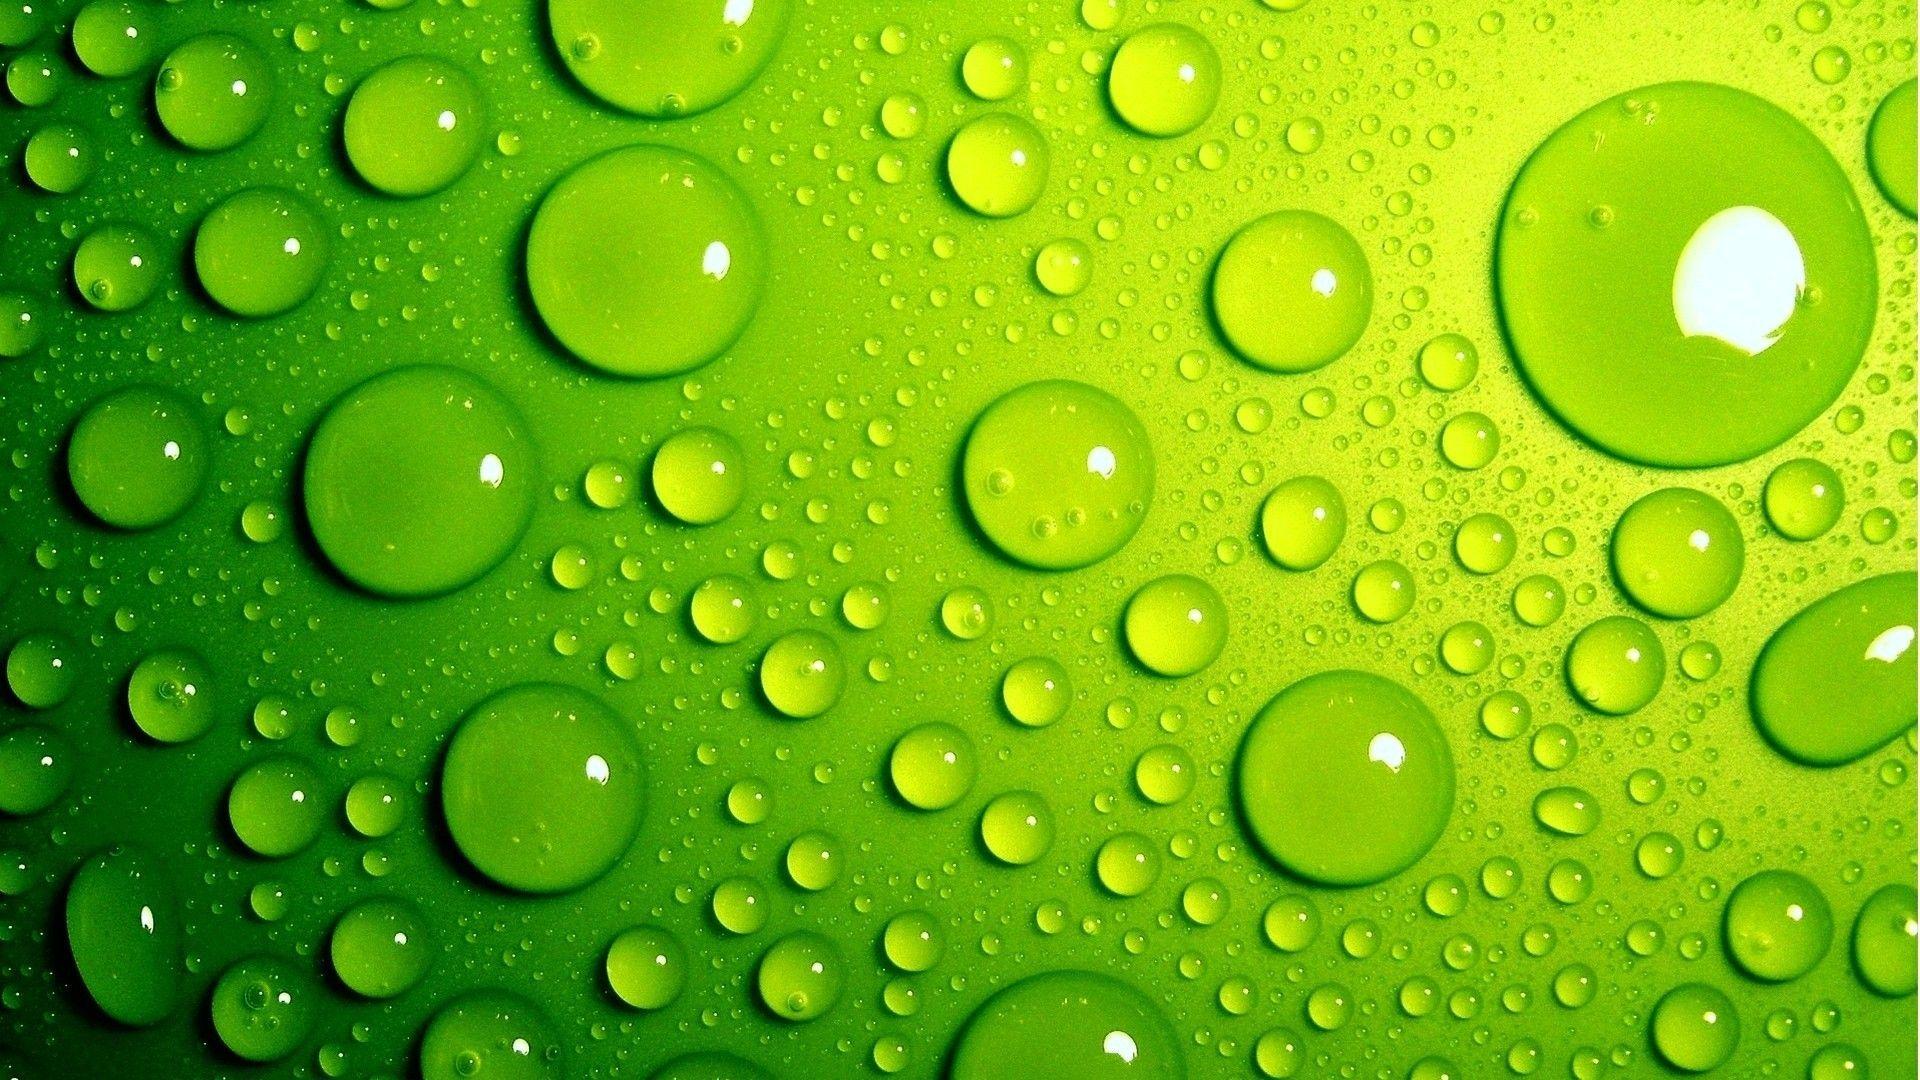 Wallpaper For > Water Drop Wallpaper For Android